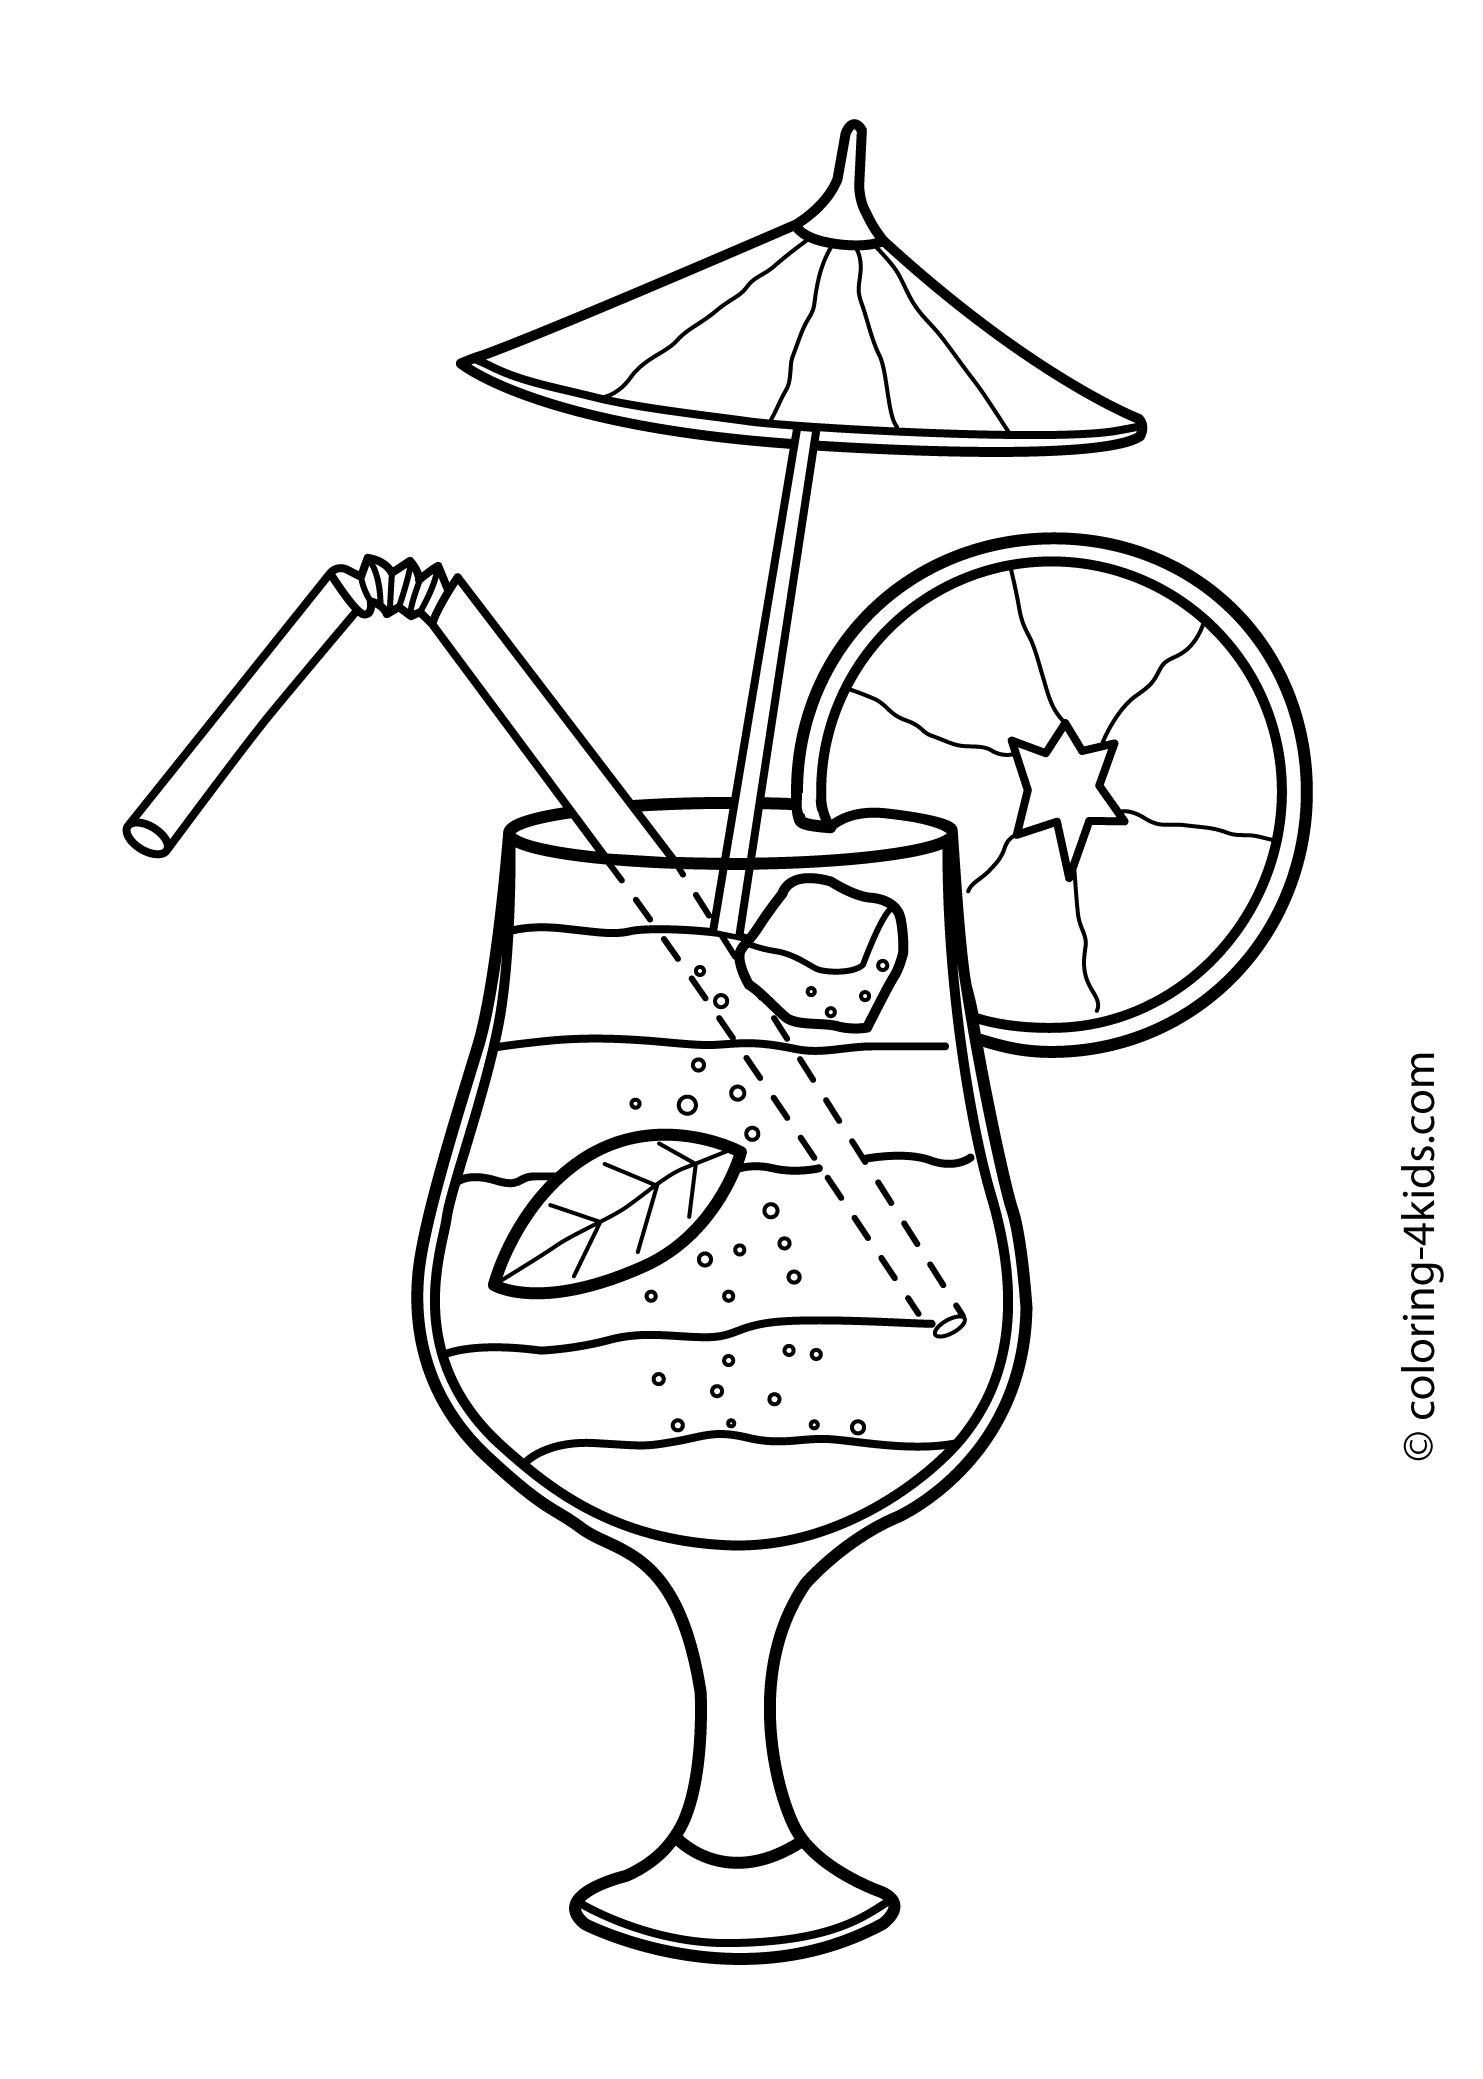 Summer cocktail coloring pages for kids, free, printable | Summer coloring  pages, Coloring pages for kids, Coloring pages